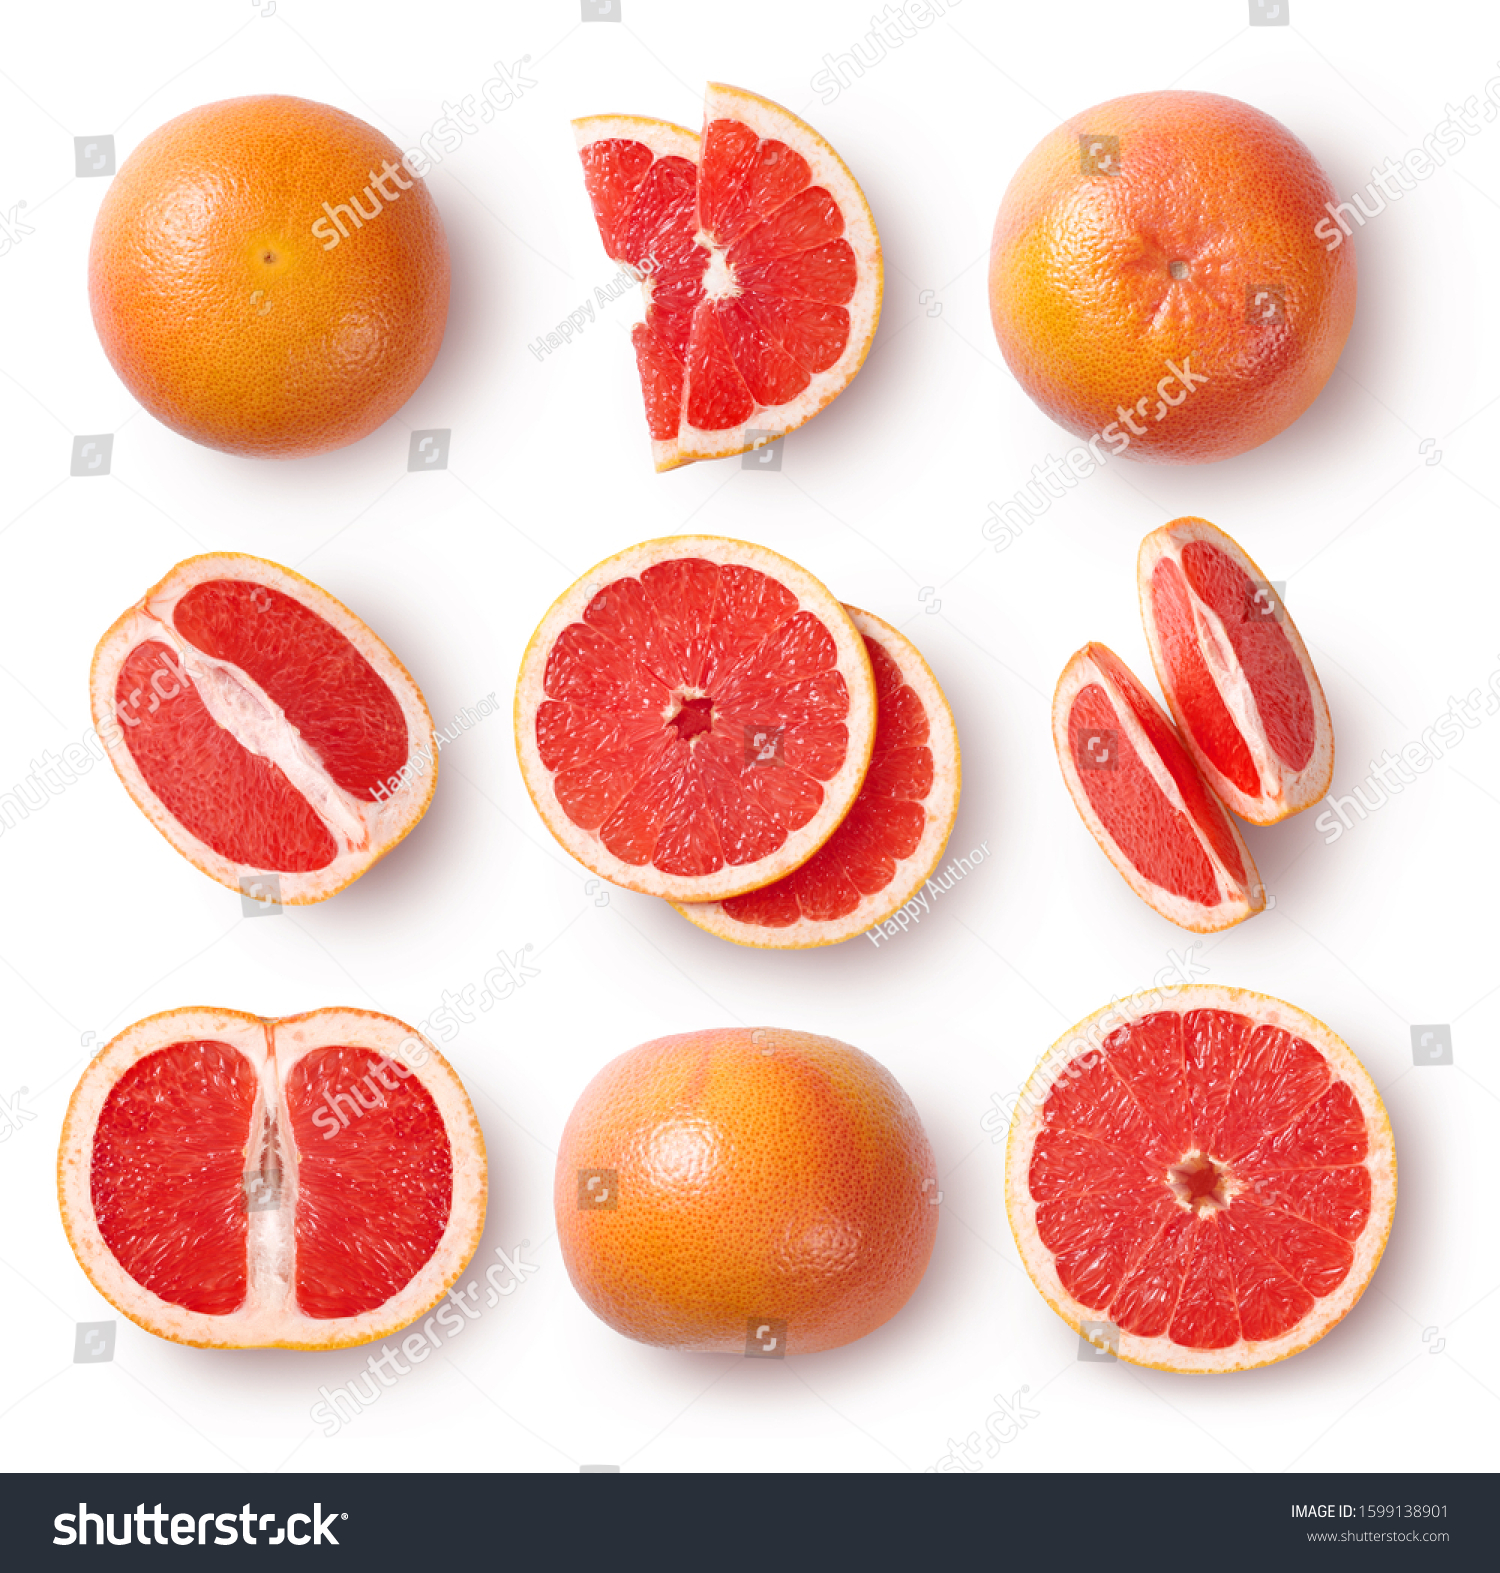 Whole and sliced grapefruits isolated on white background. Top view. #1599138901